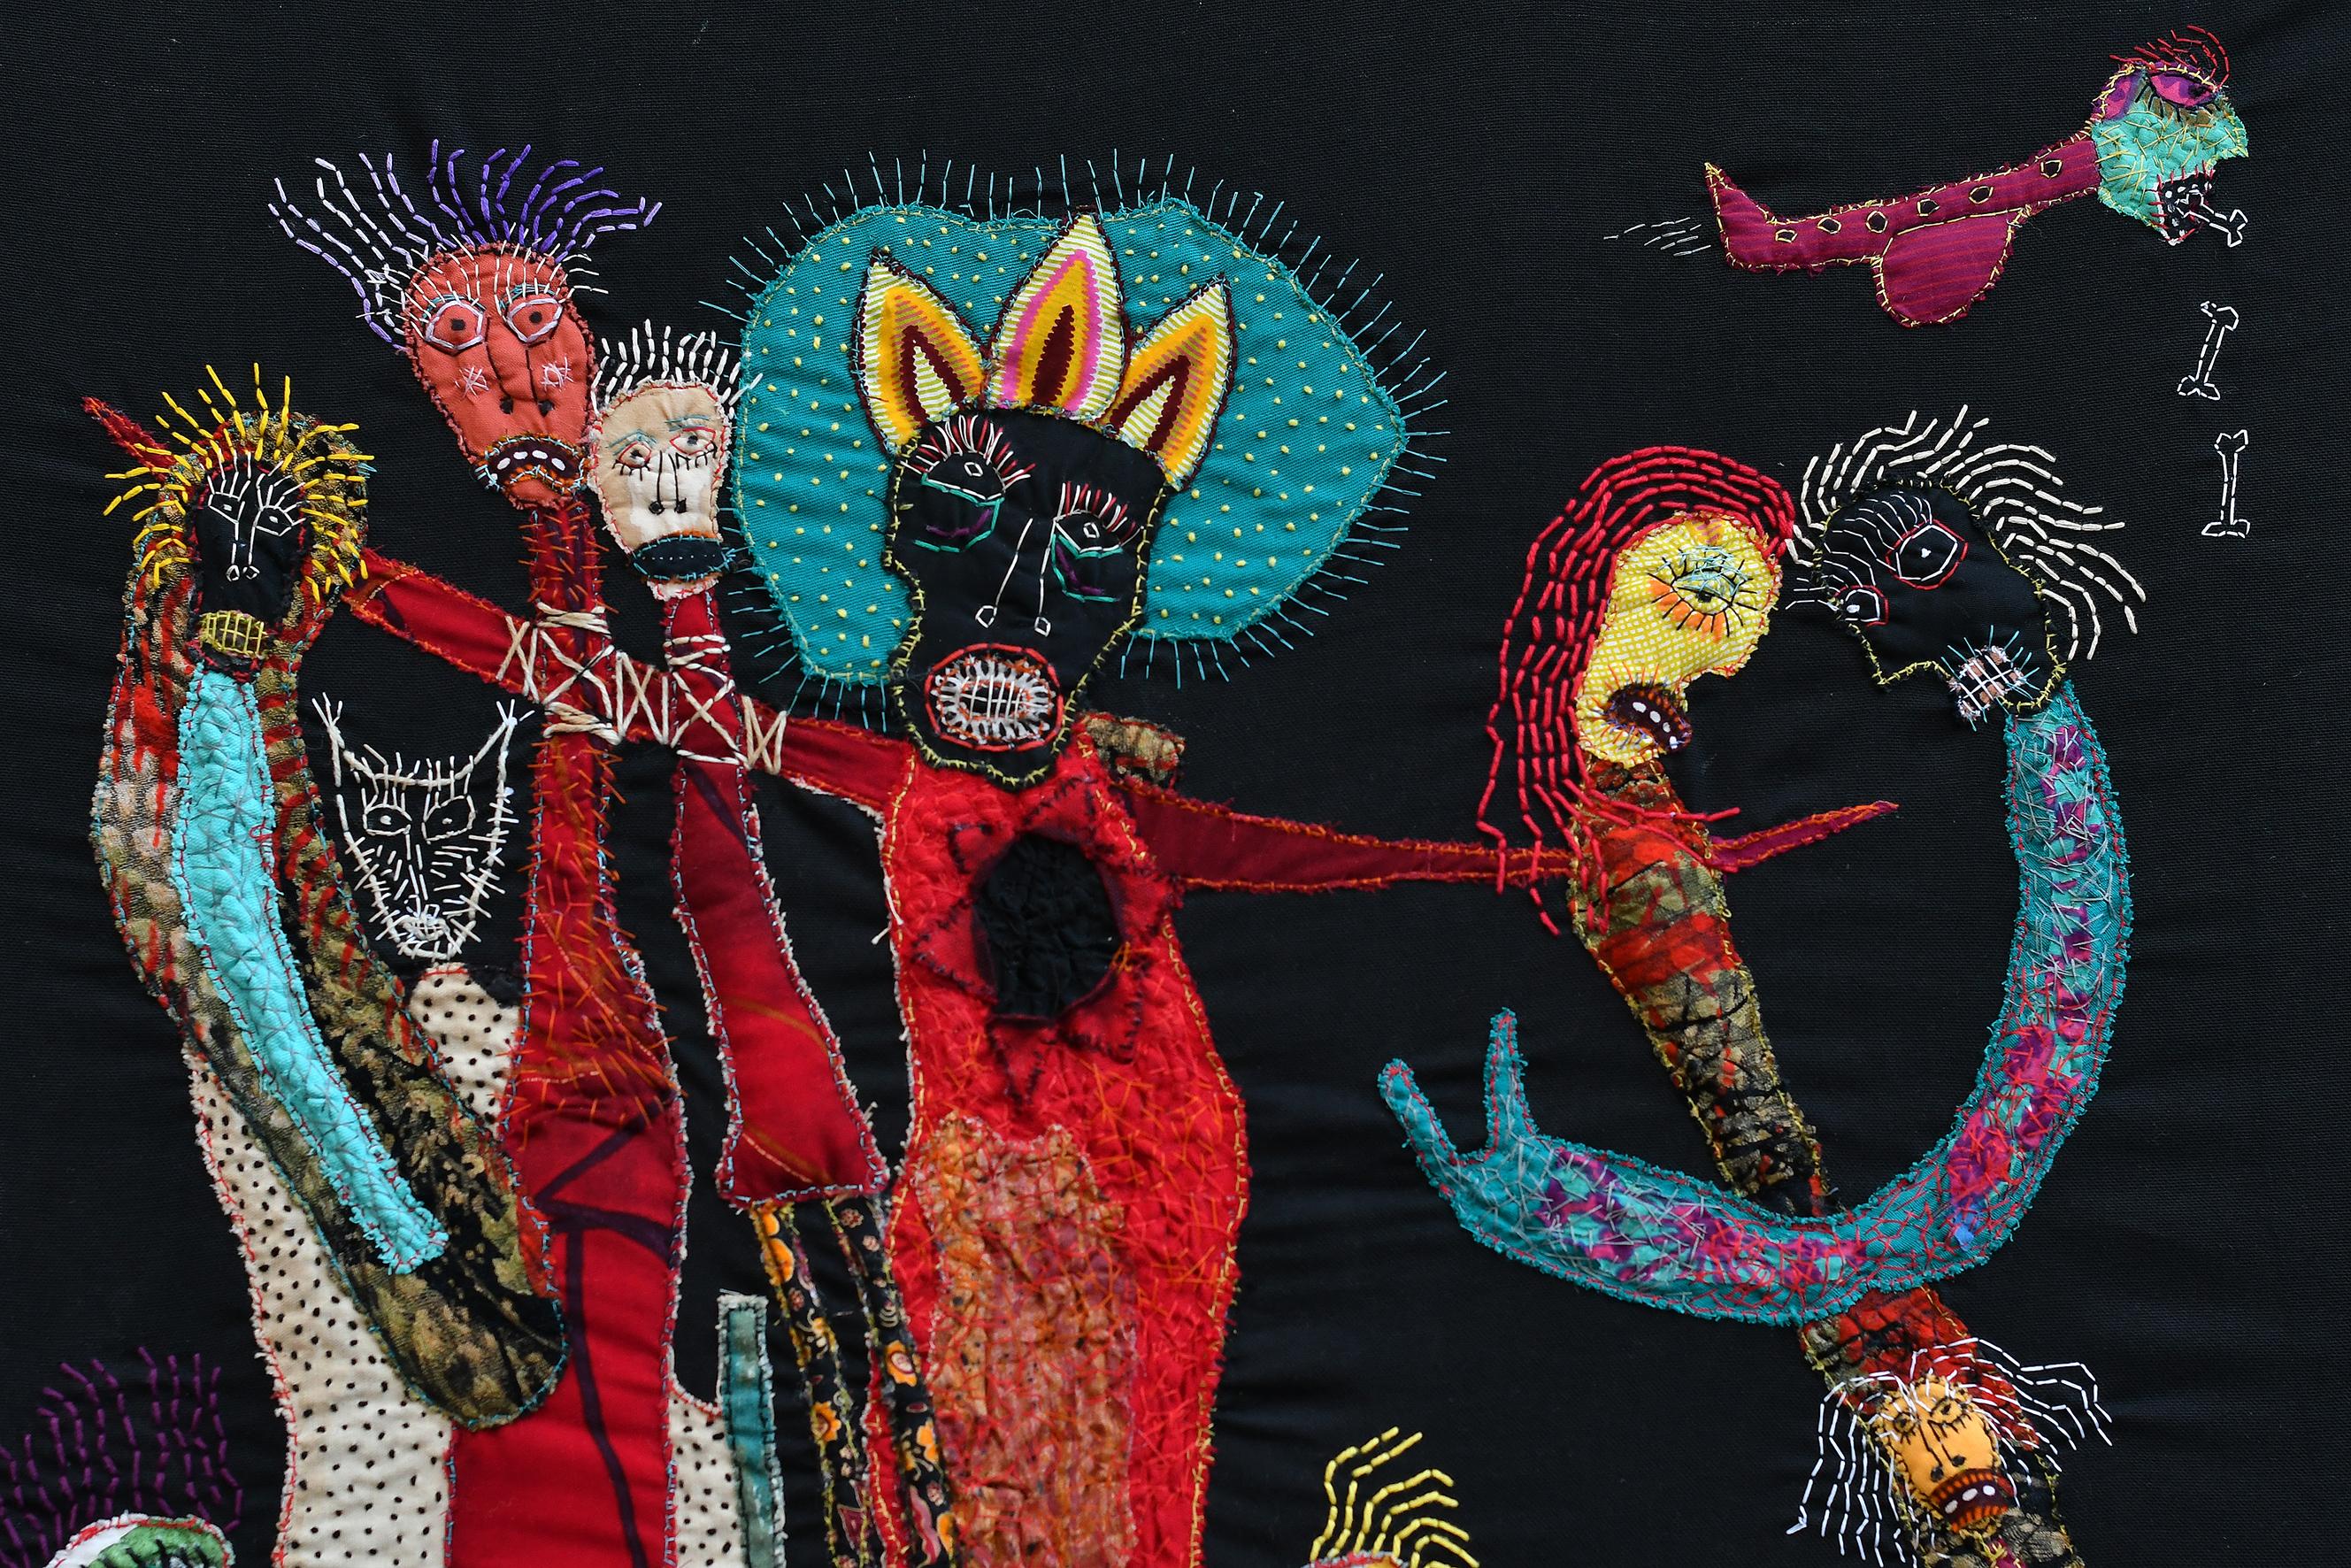 Créatures of the mined lands Barbara d'Antuono 21st Century textile outsider art en vente 2